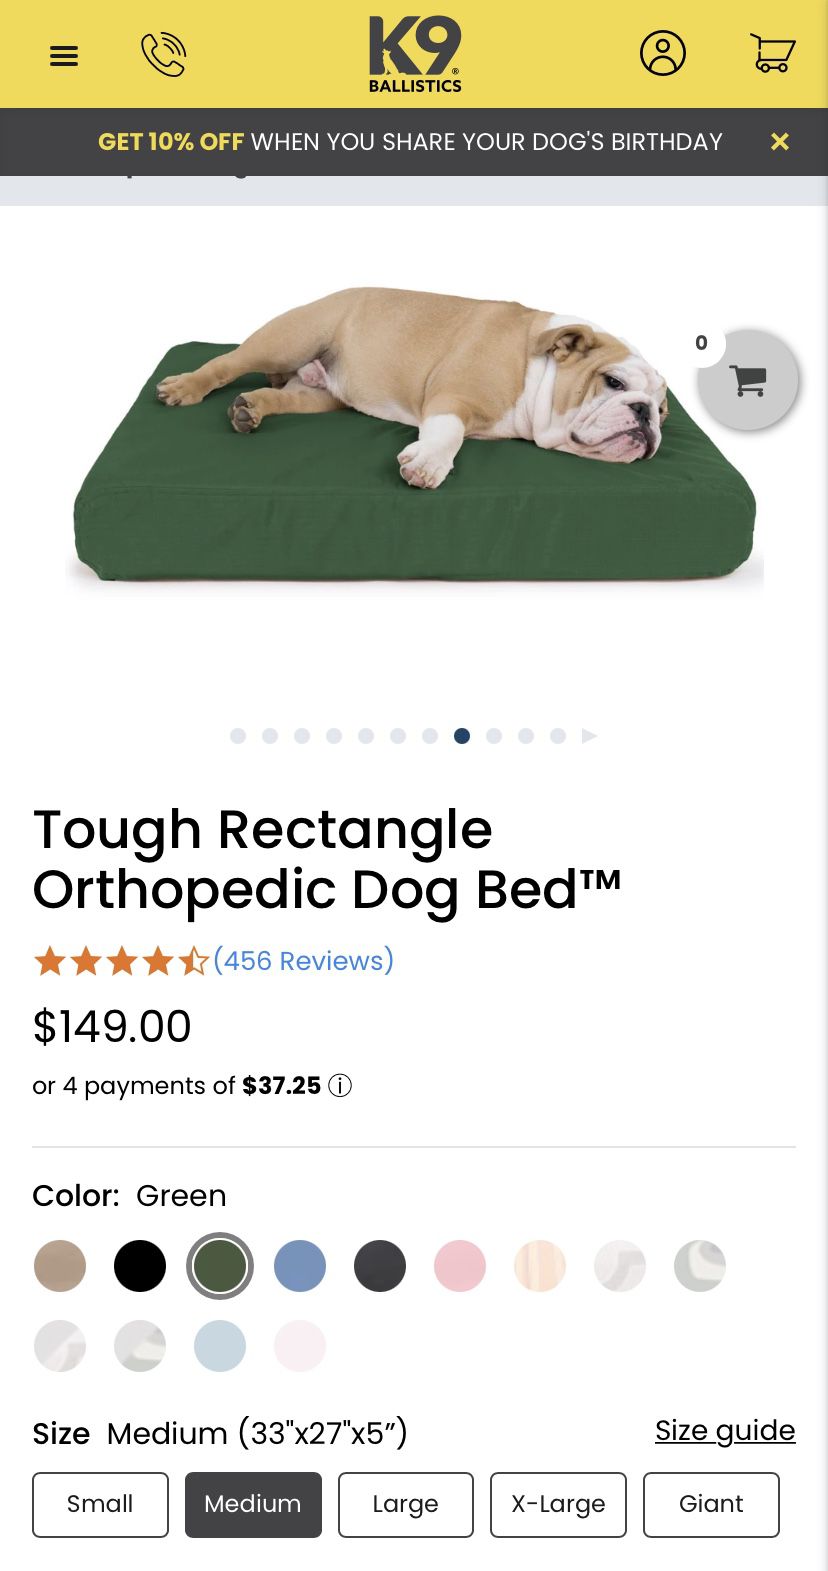 BRAND NEW: medium sized chewproof and orthopedic dog bed!!